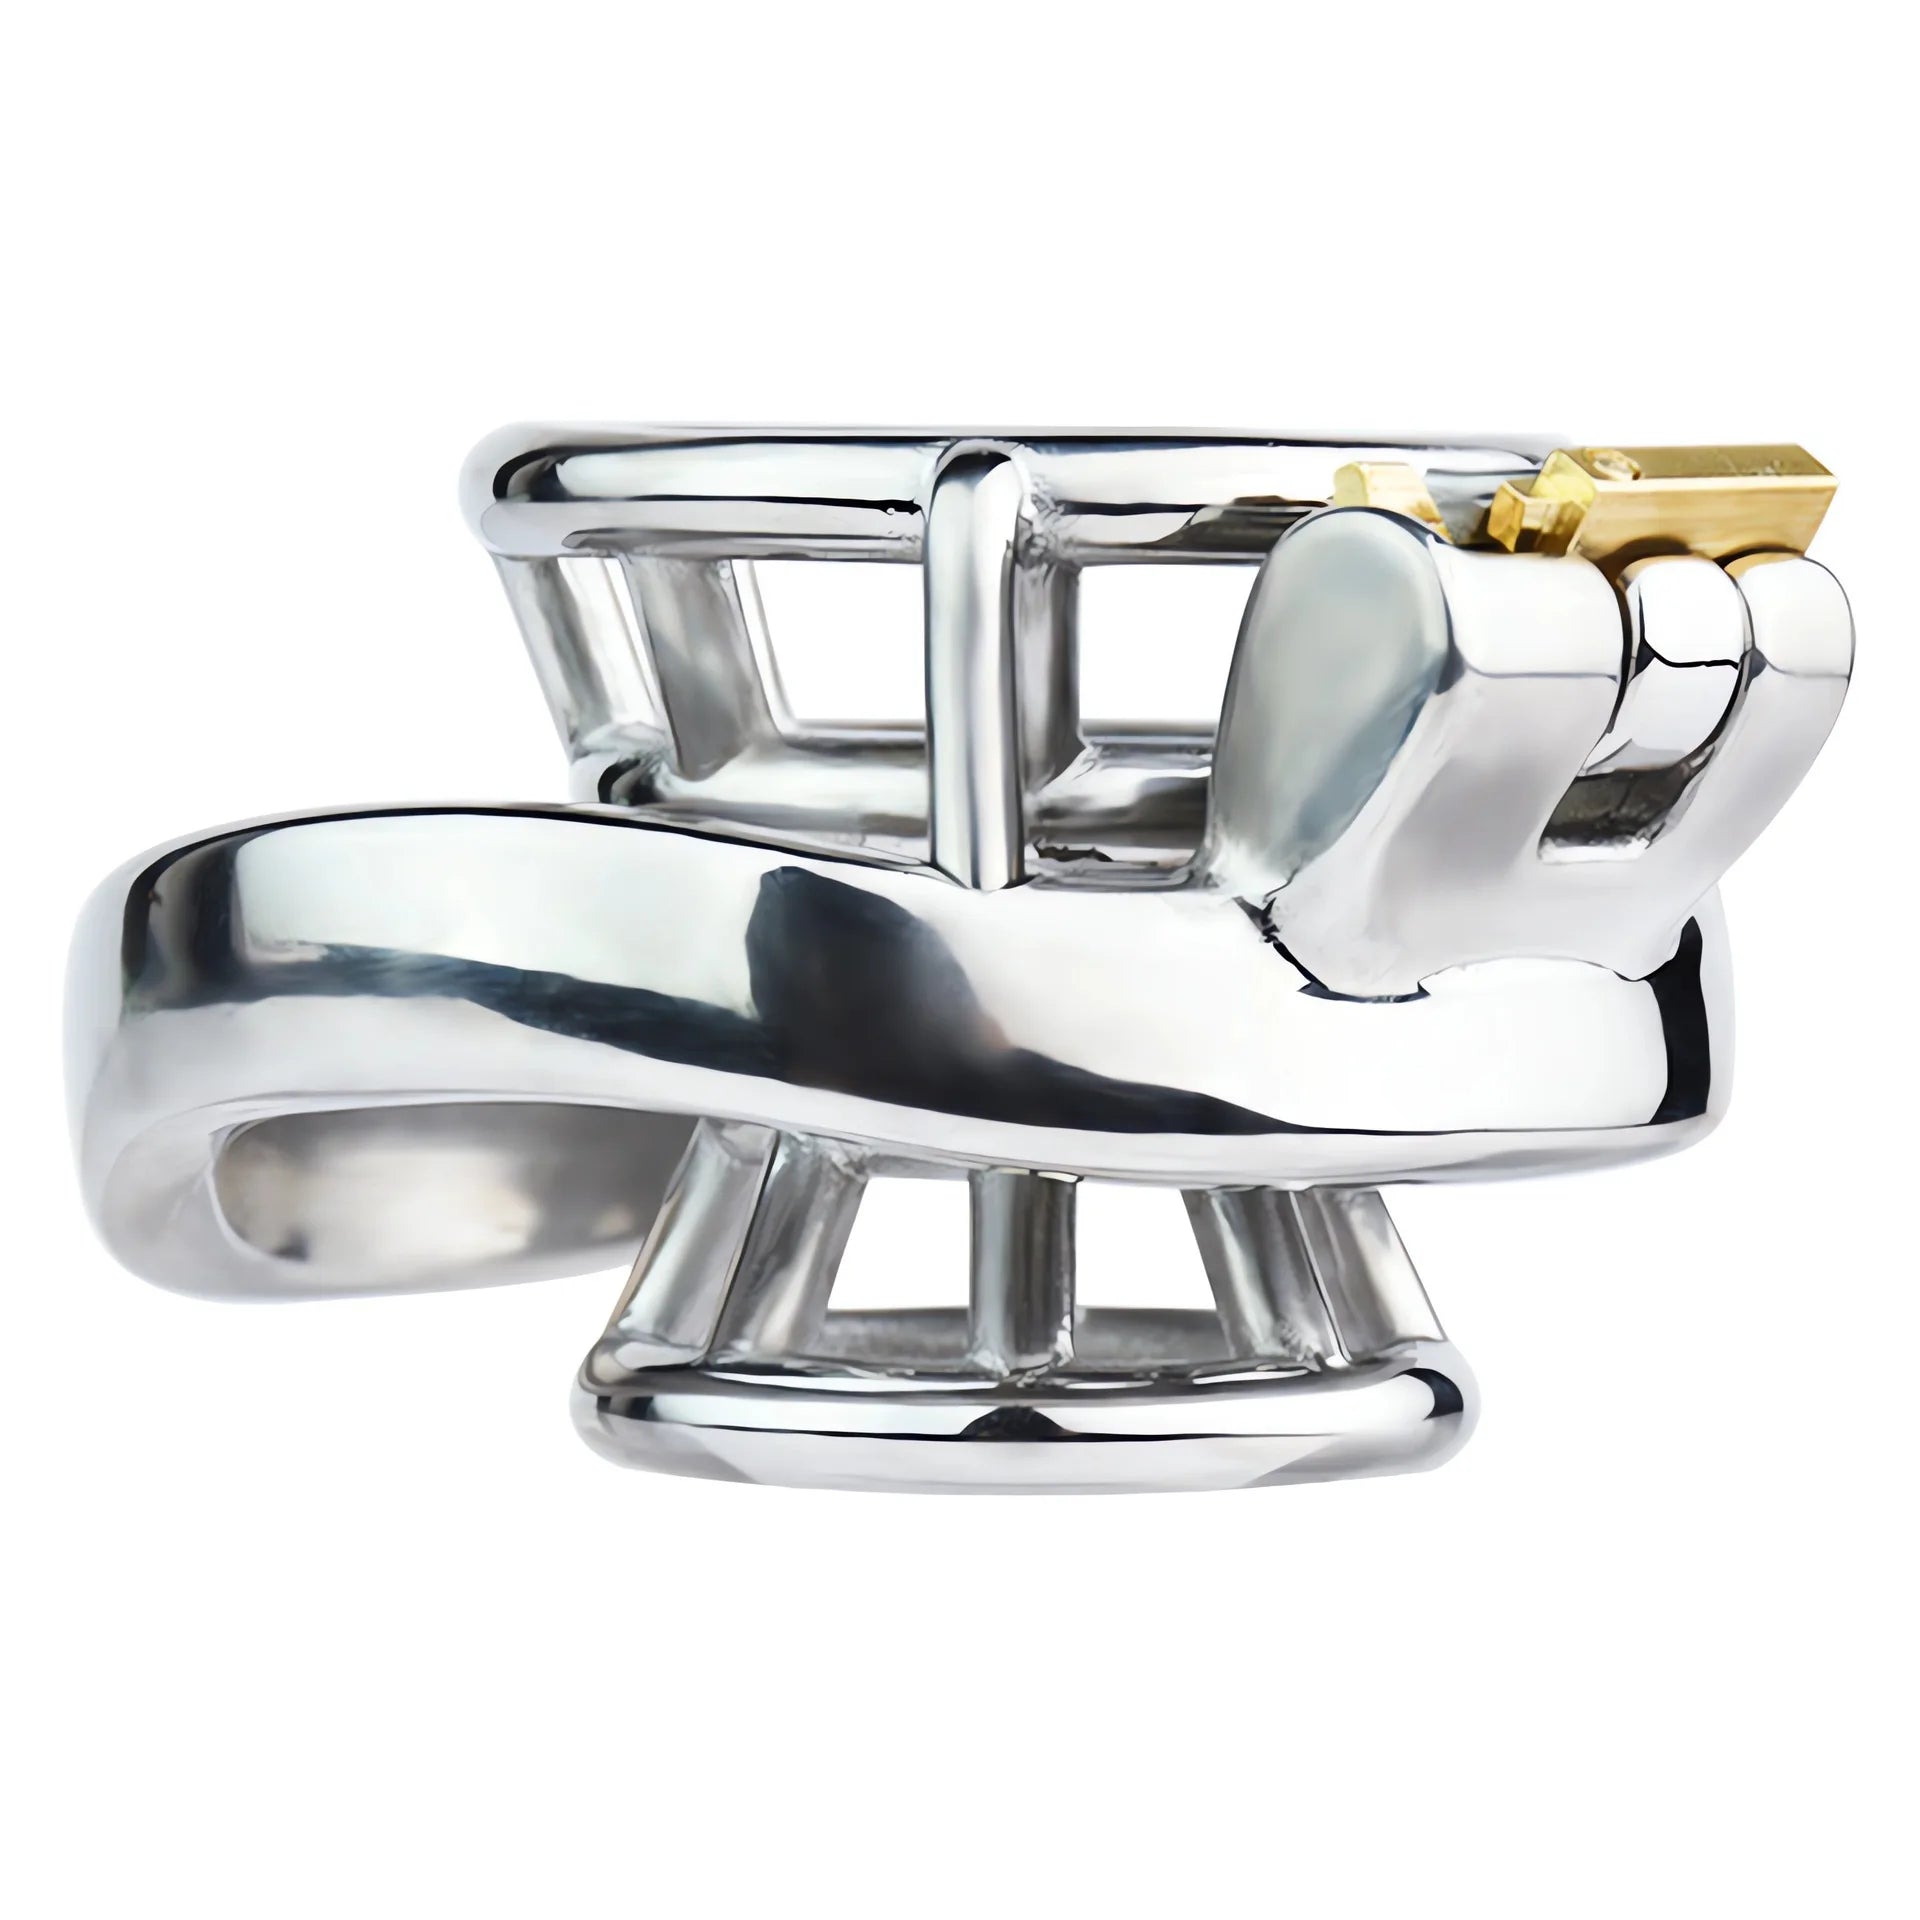 Metal Inverted Chastity Cage Stainless Steel Negative Chastity Device For Men - InvertedChastity